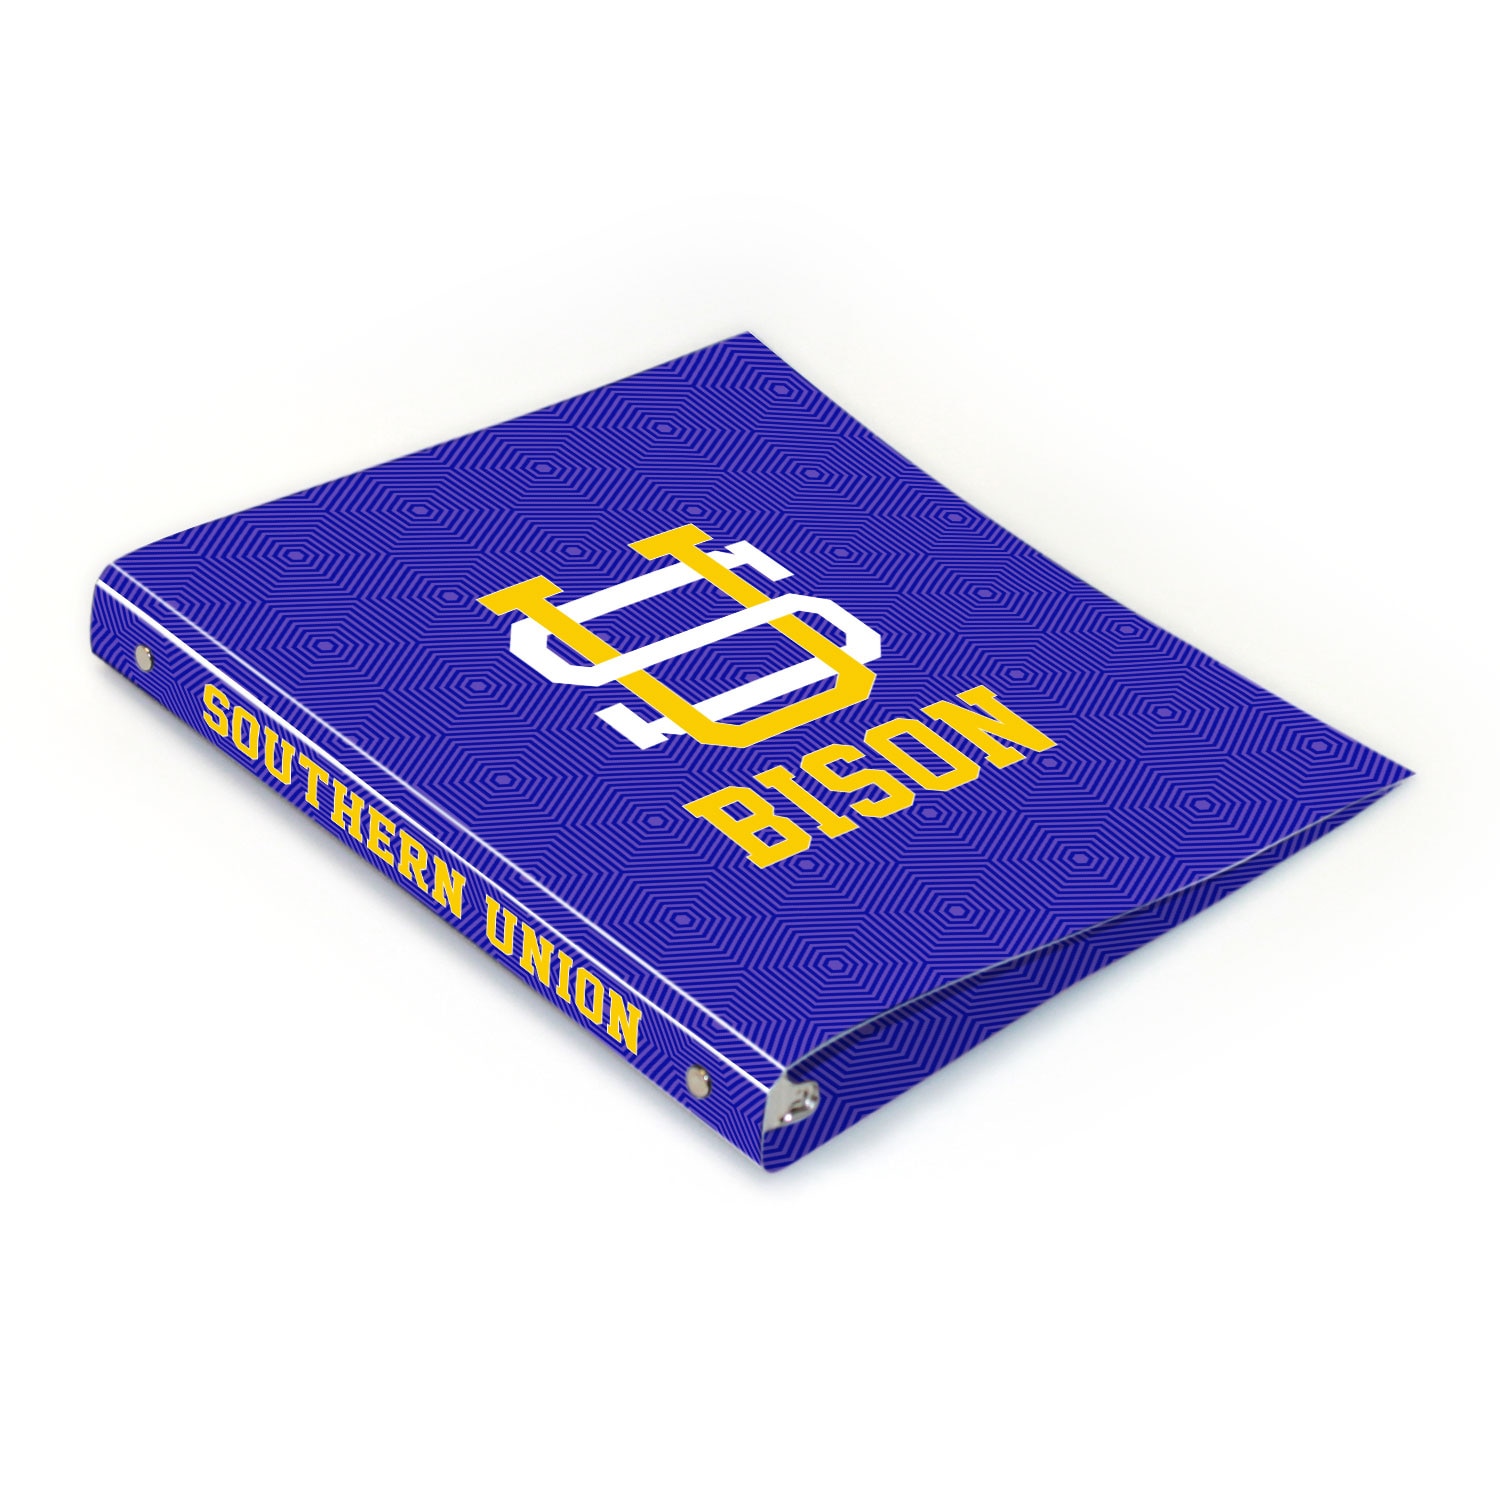 Southern Union Full Color 2 sided Imprinted Flexible 1" Logo 1 Binder 10.5" x 11.5"